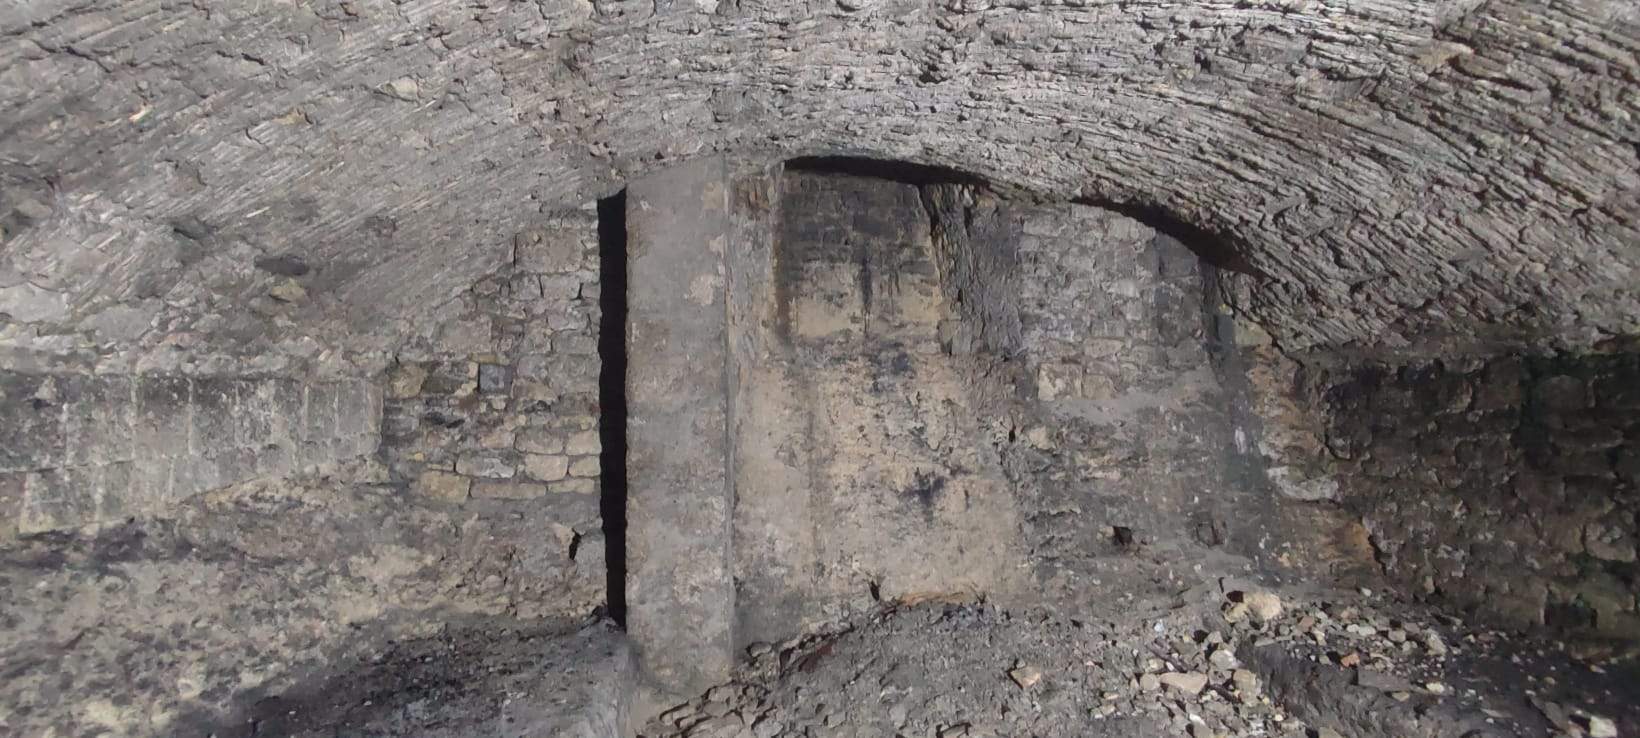 Tarquinia, ancient underground rooms discovered under the new registry office